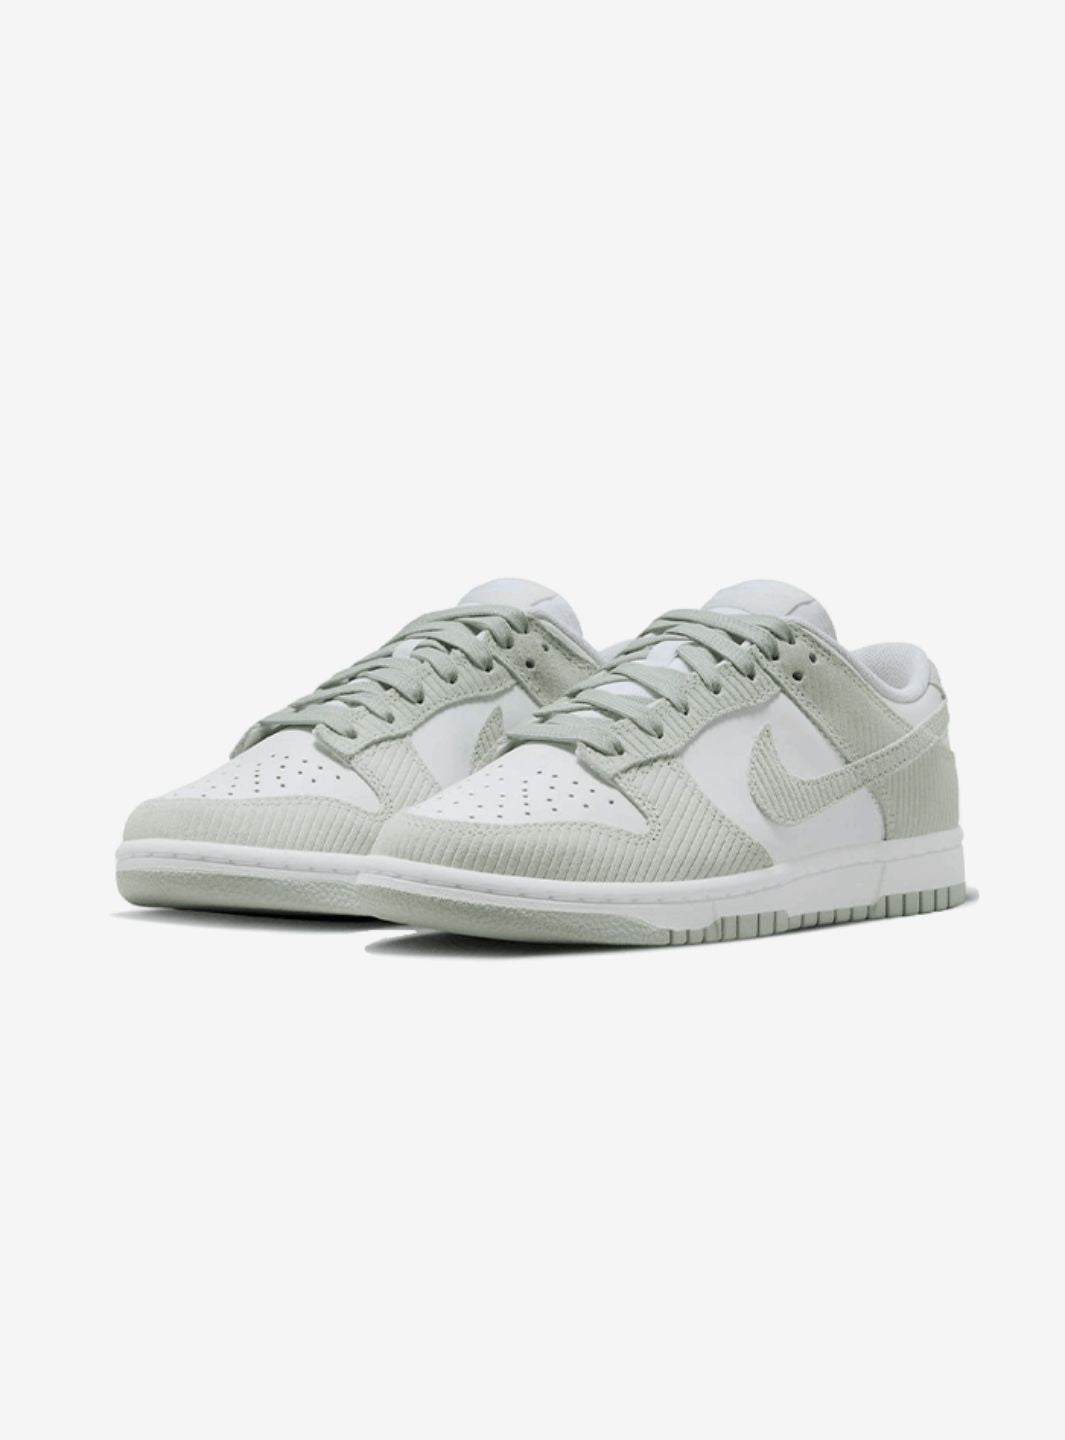 Nike Dunk Low Grey Light Silver Corduroy - FN7658-100 | ResellZone